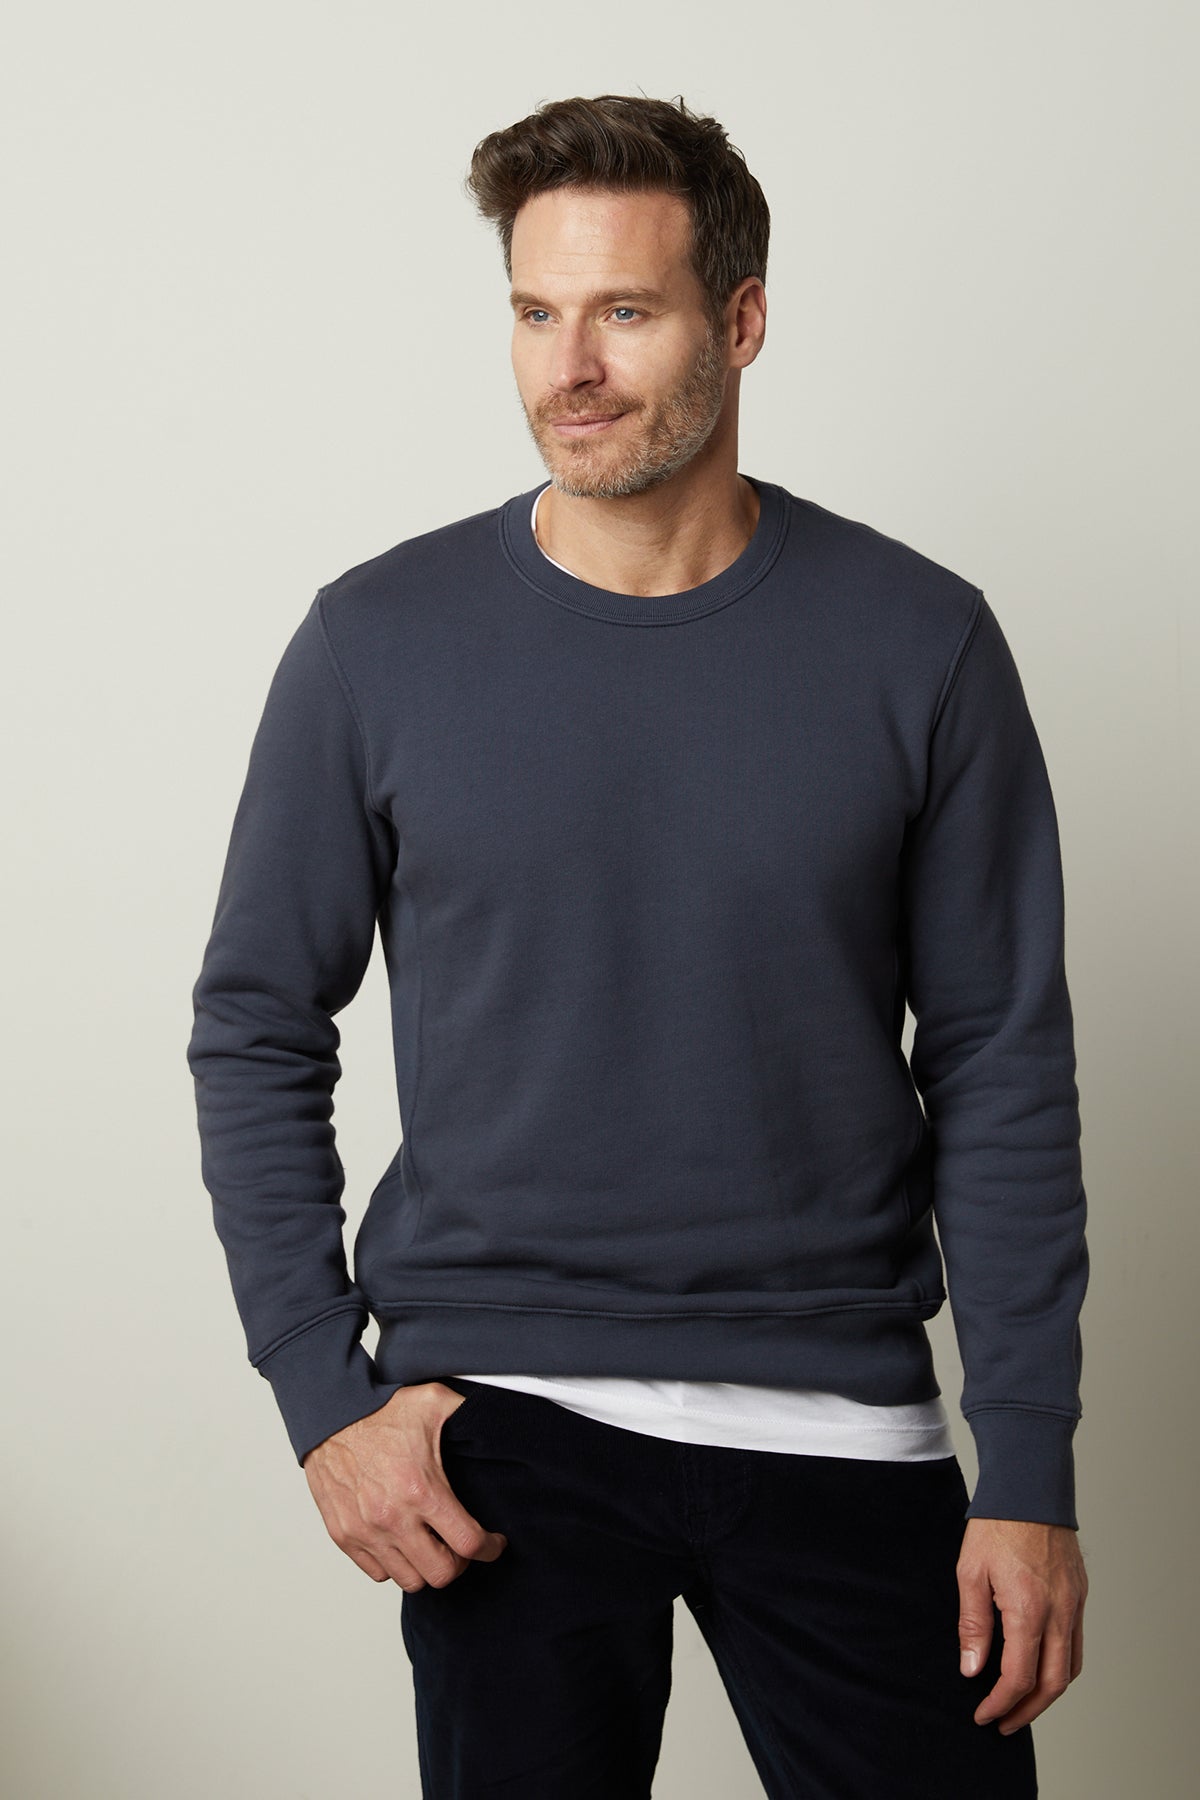   A man wearing a Velvet by Graham & Spencer KING CREW NECK SWEATSHIRT and black pants. 